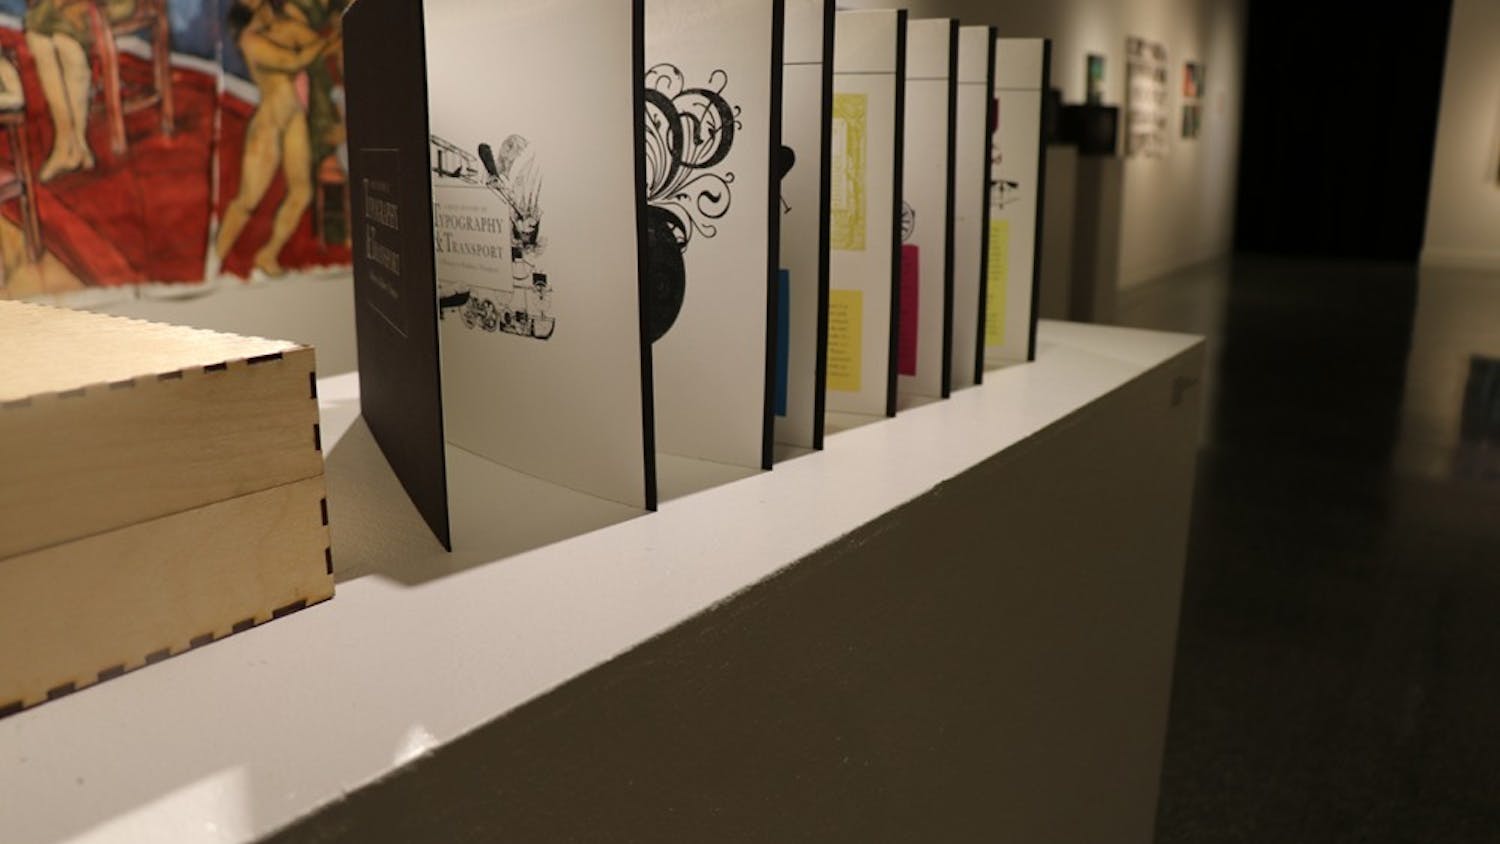 Senior Ashley&nbsp;VanArsdale's piece "History of Typography and Transport" resembles an accordion book. Although it required a lot of time and effort, the artist said it was her favorite personal piece in this year's gallery.